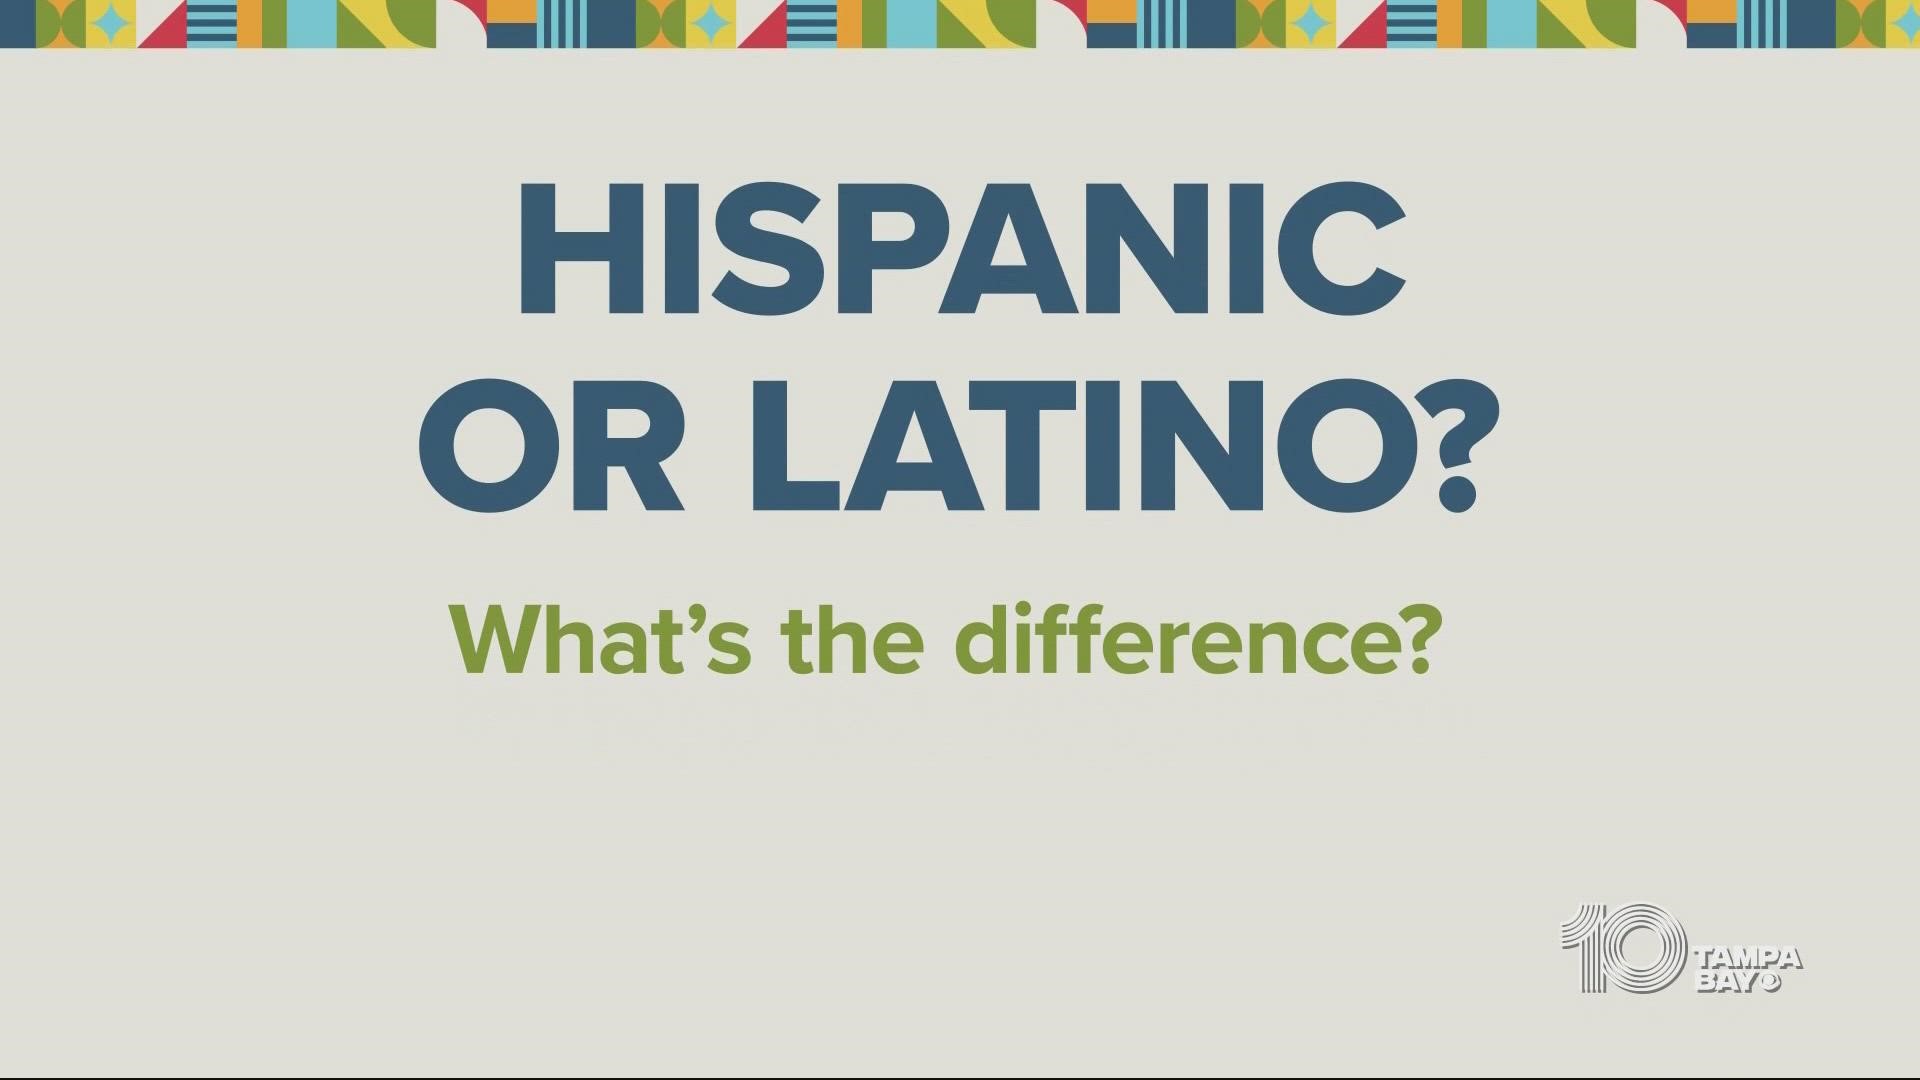 According to the census, more than 62 million people identify as Hispanic or Latino in the U.S. That’s at an all-time high.